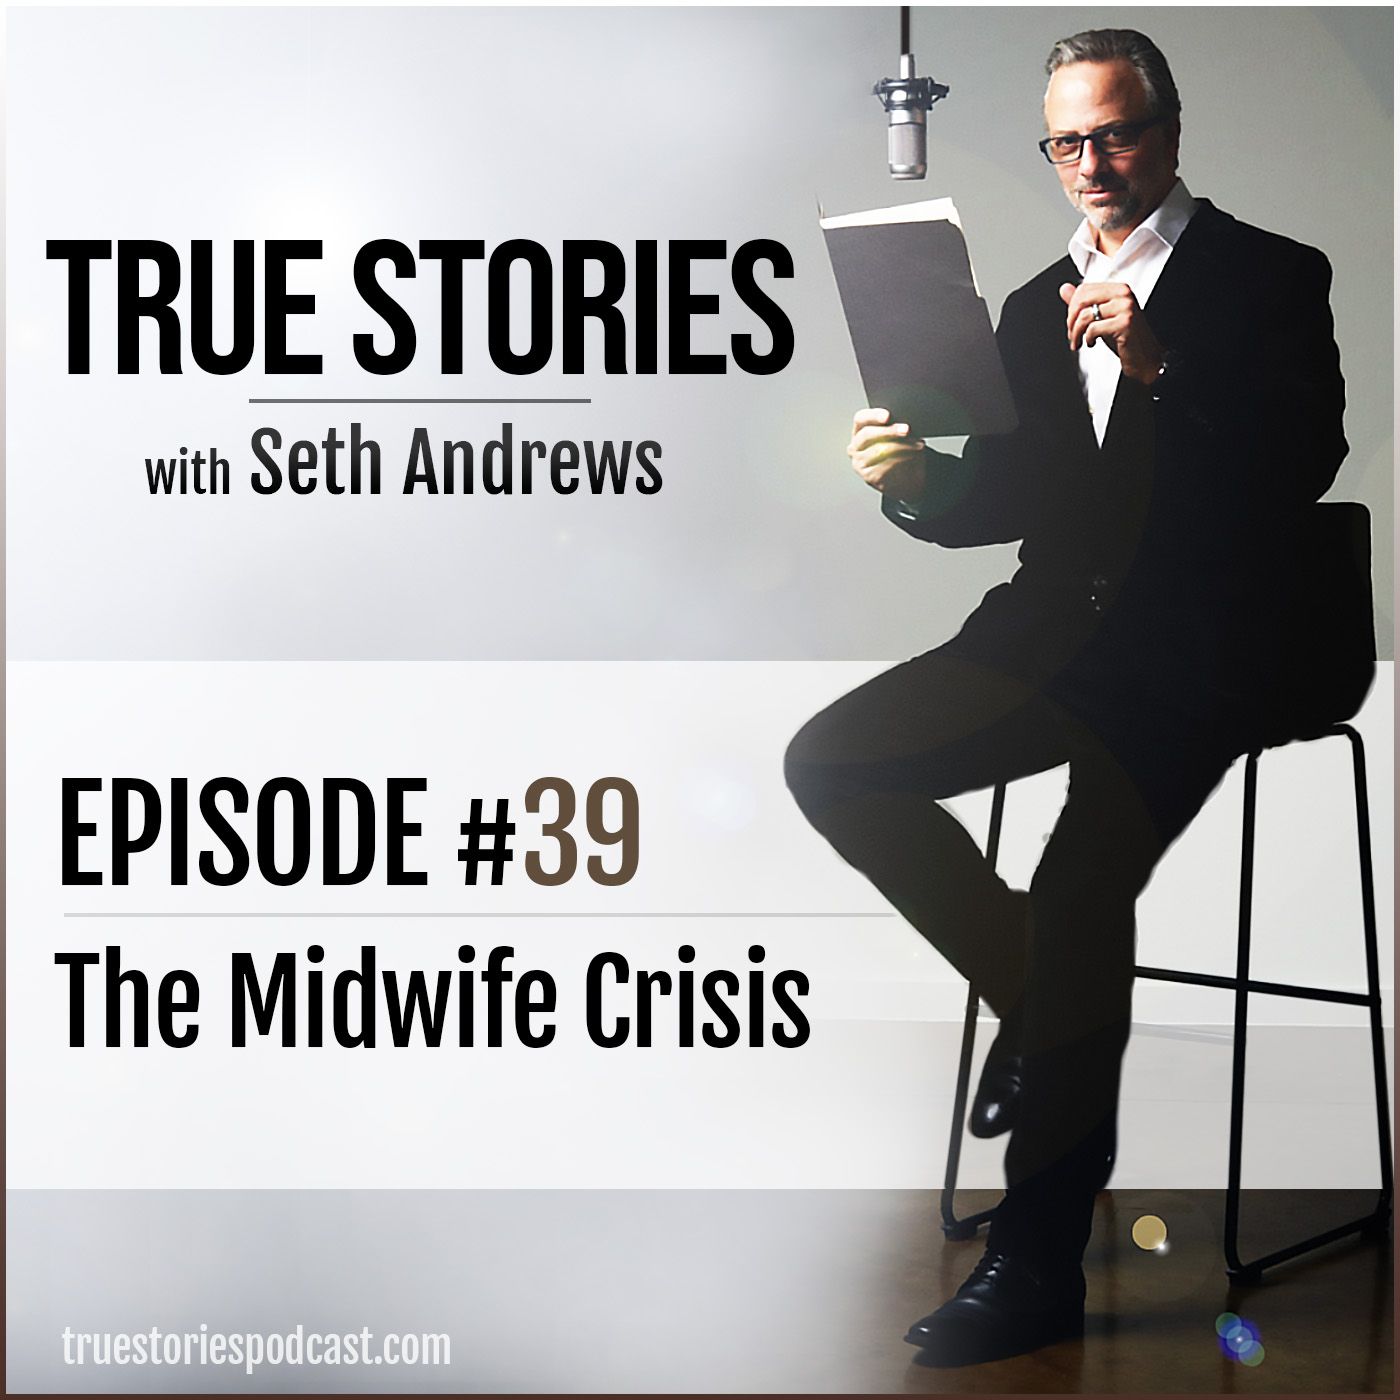 True Stories #39 - The Midwife Crisis